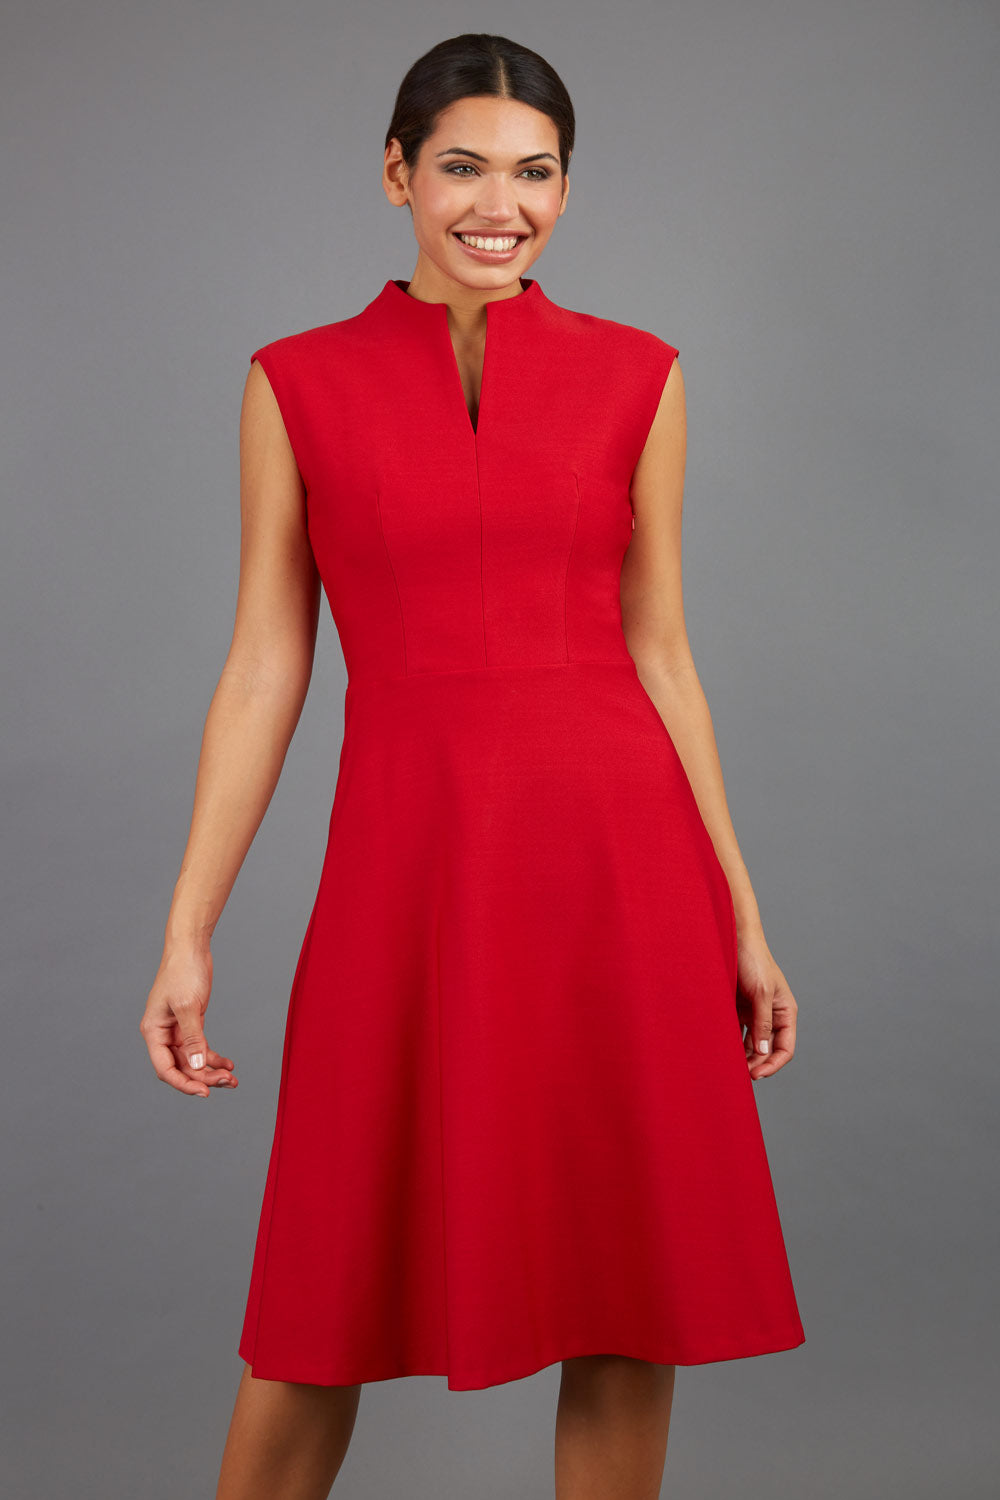 Brunette Model is wearing a sleeveless swing high neck dress with high neck in cardinal red by Diva Catwalk front